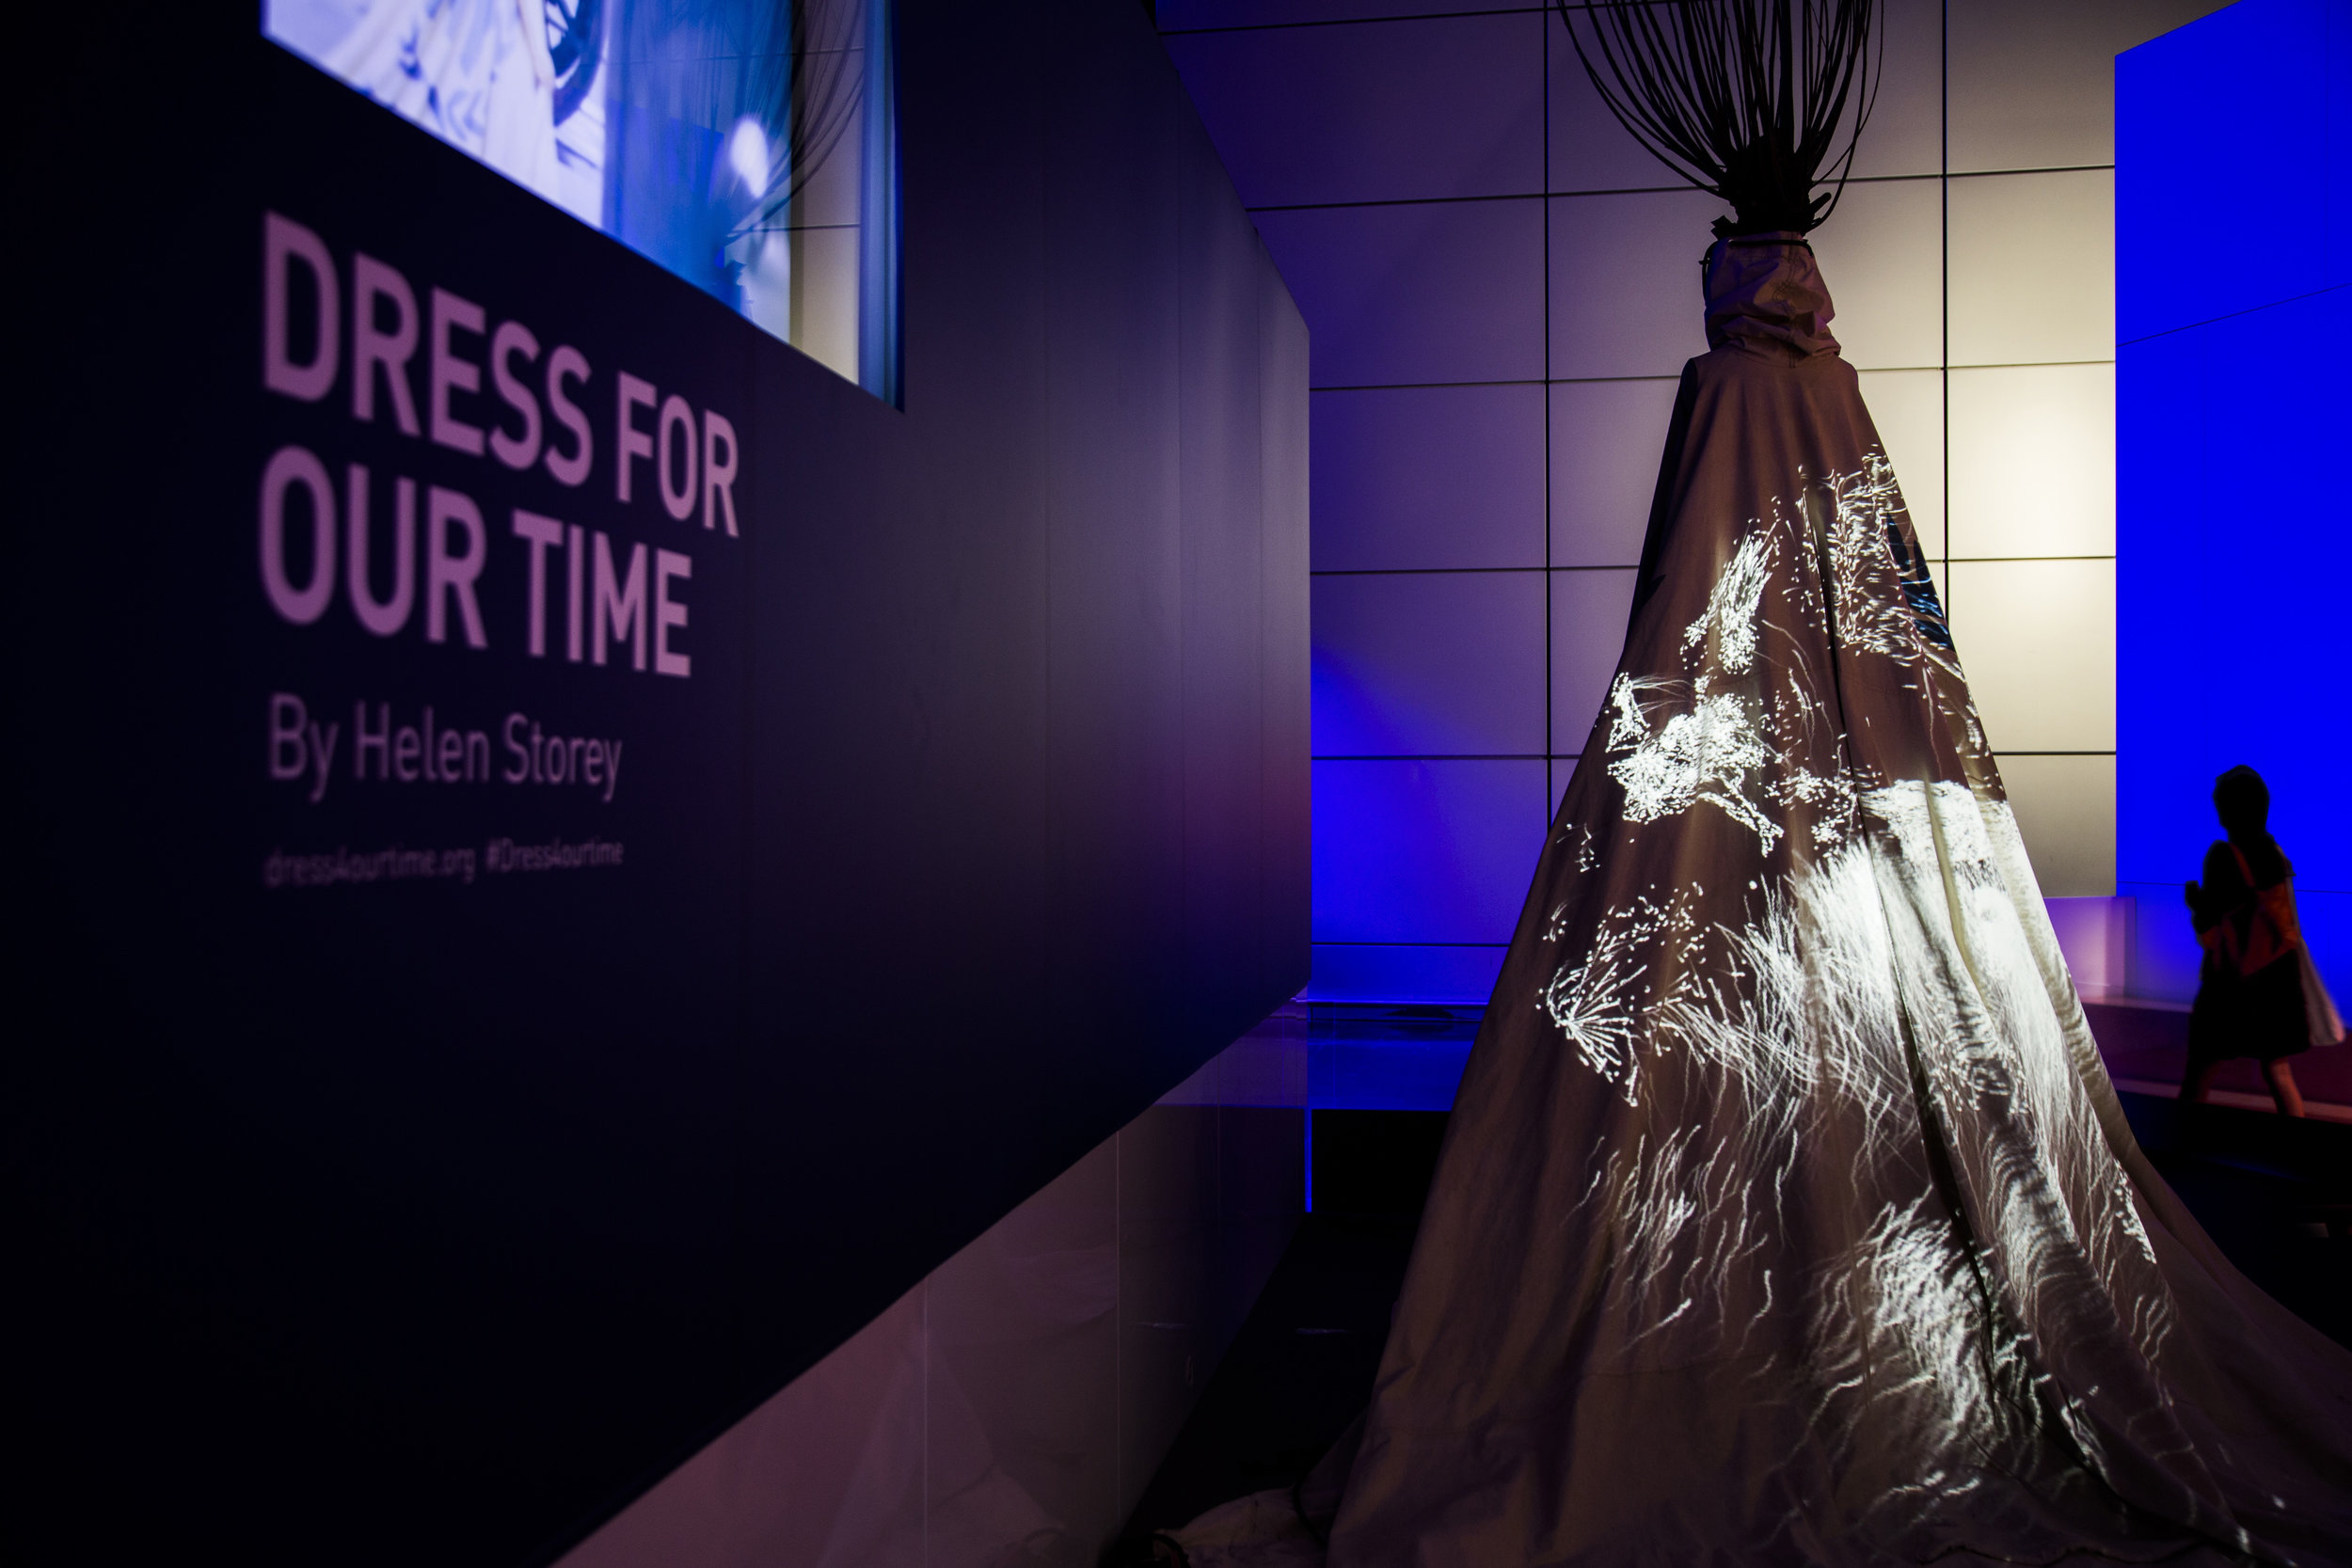  Dress at The Science Museum London 